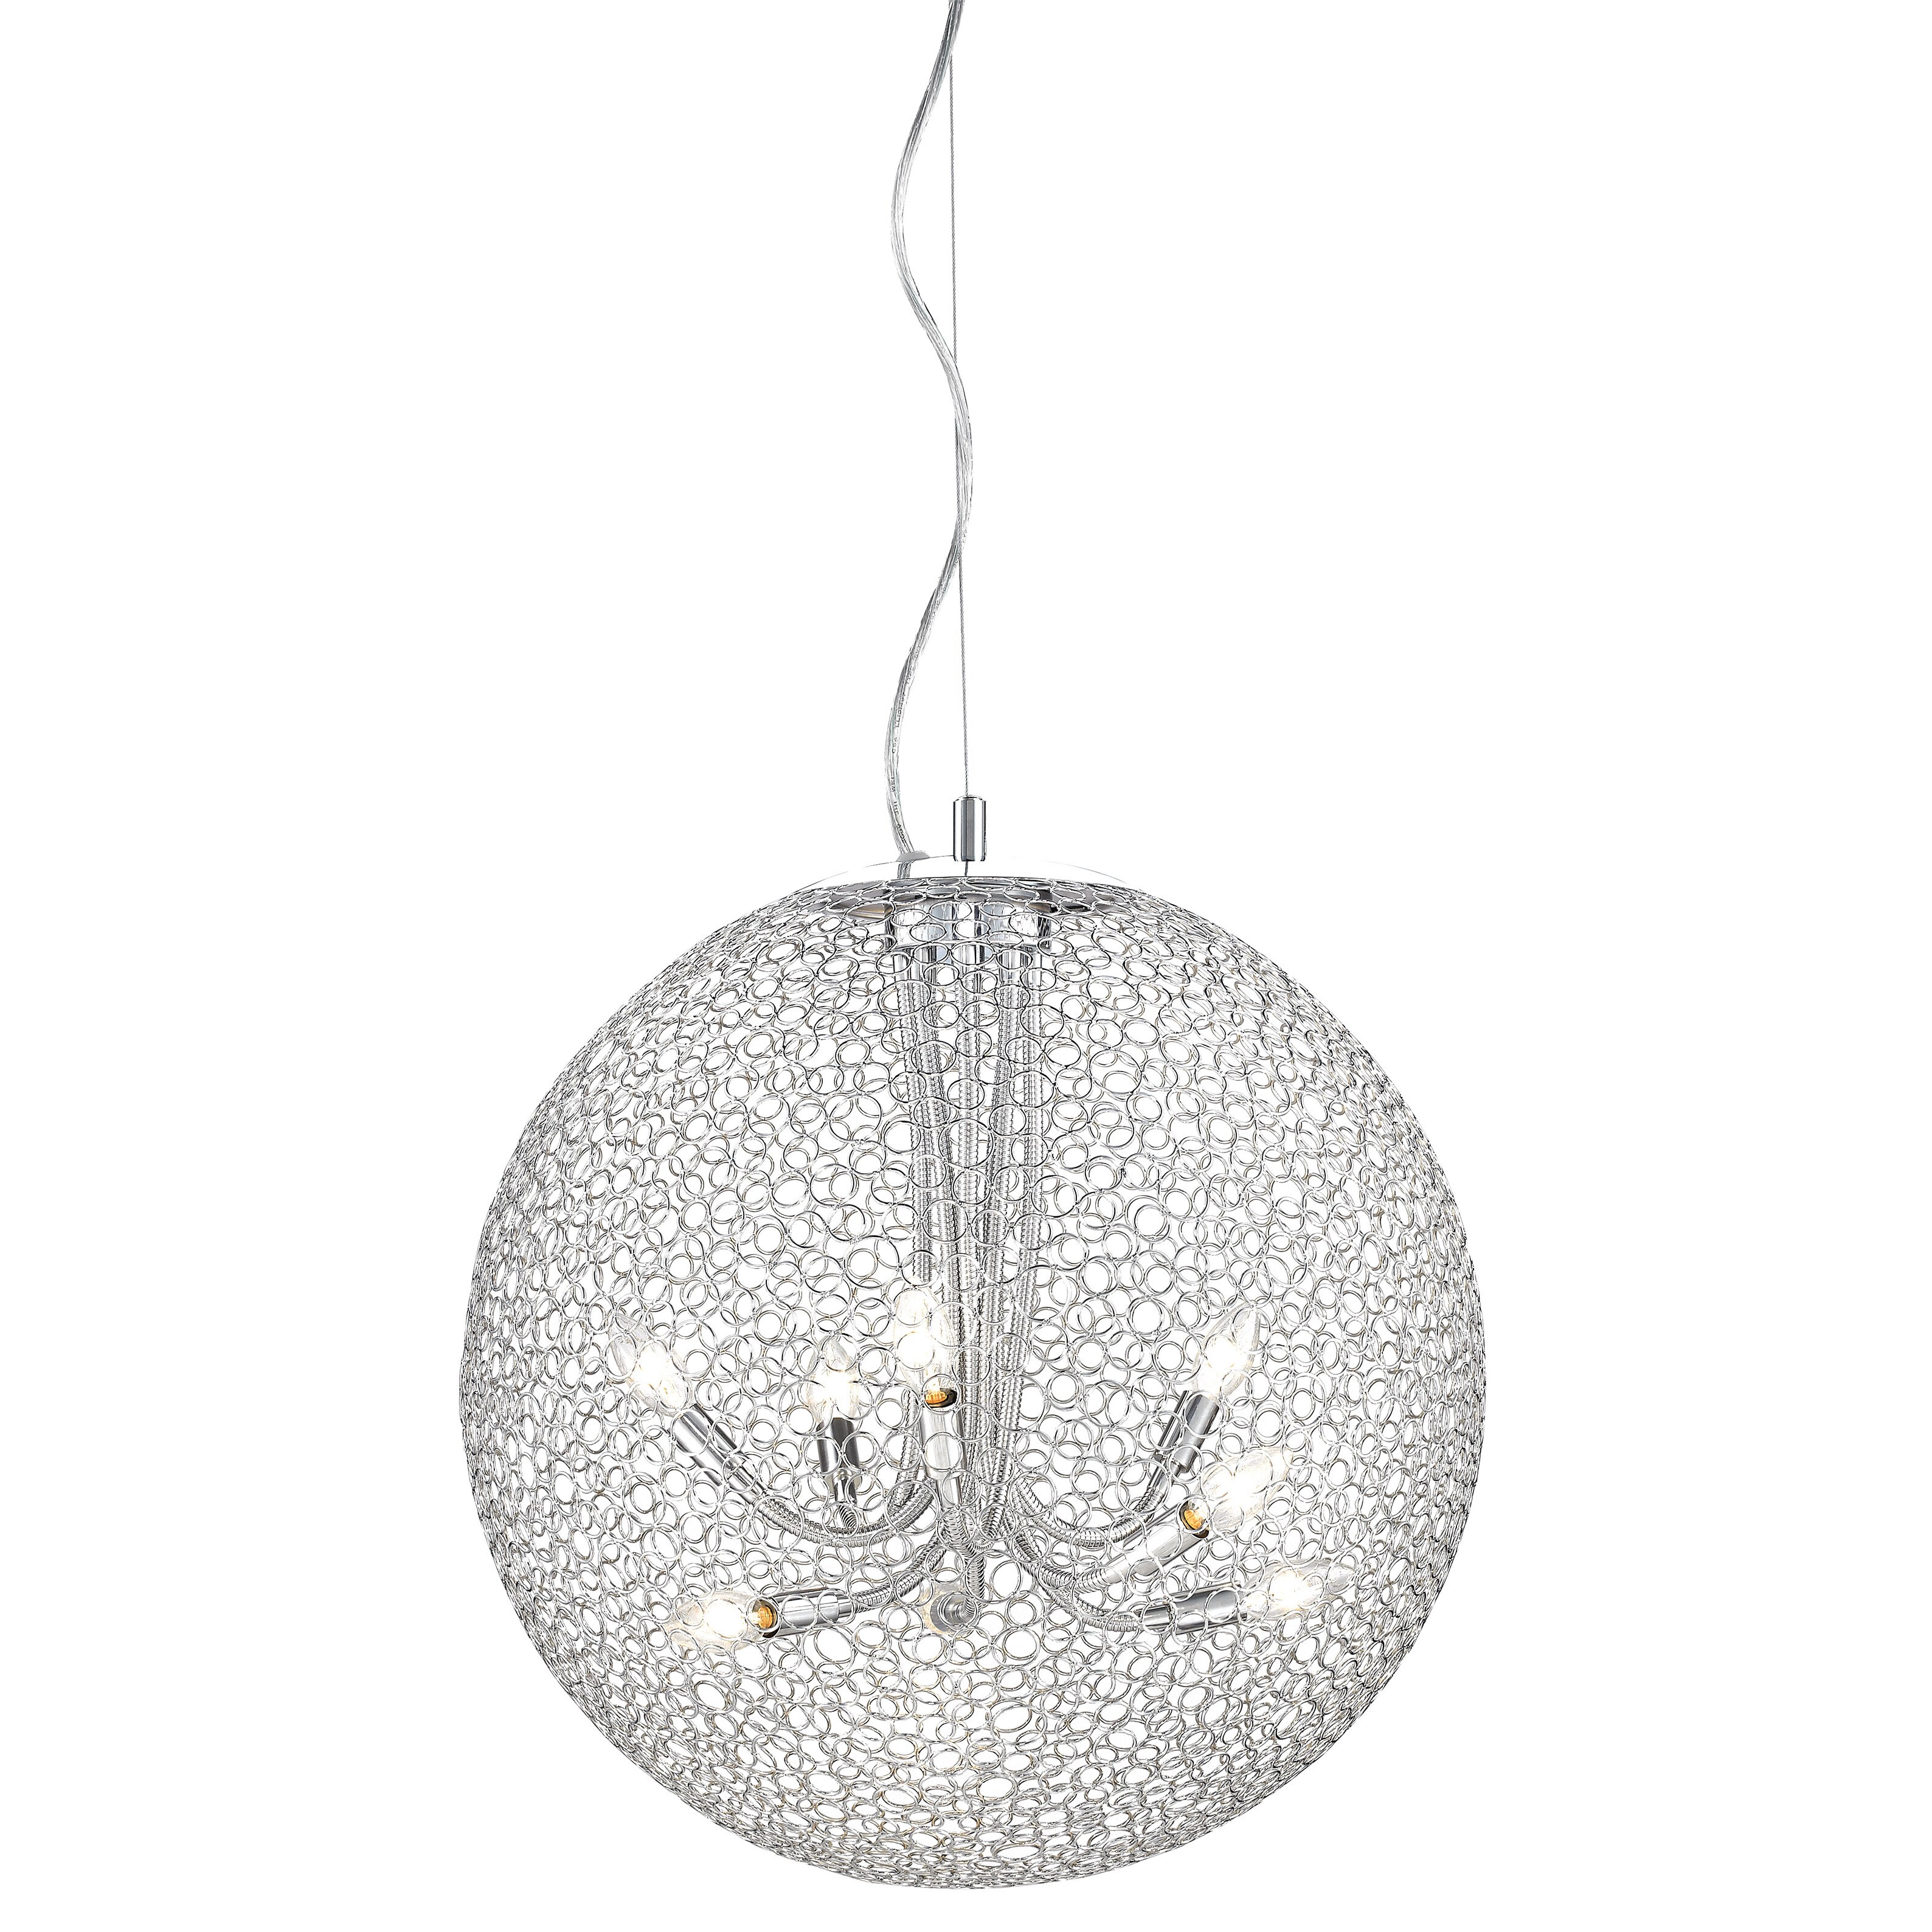 Z lite 8 light Pendant (SteelDimensions 25 inches high x 24 inches wide x 24 inches deepThis fixture does need to be hard wired. Professional installation is recommended.)